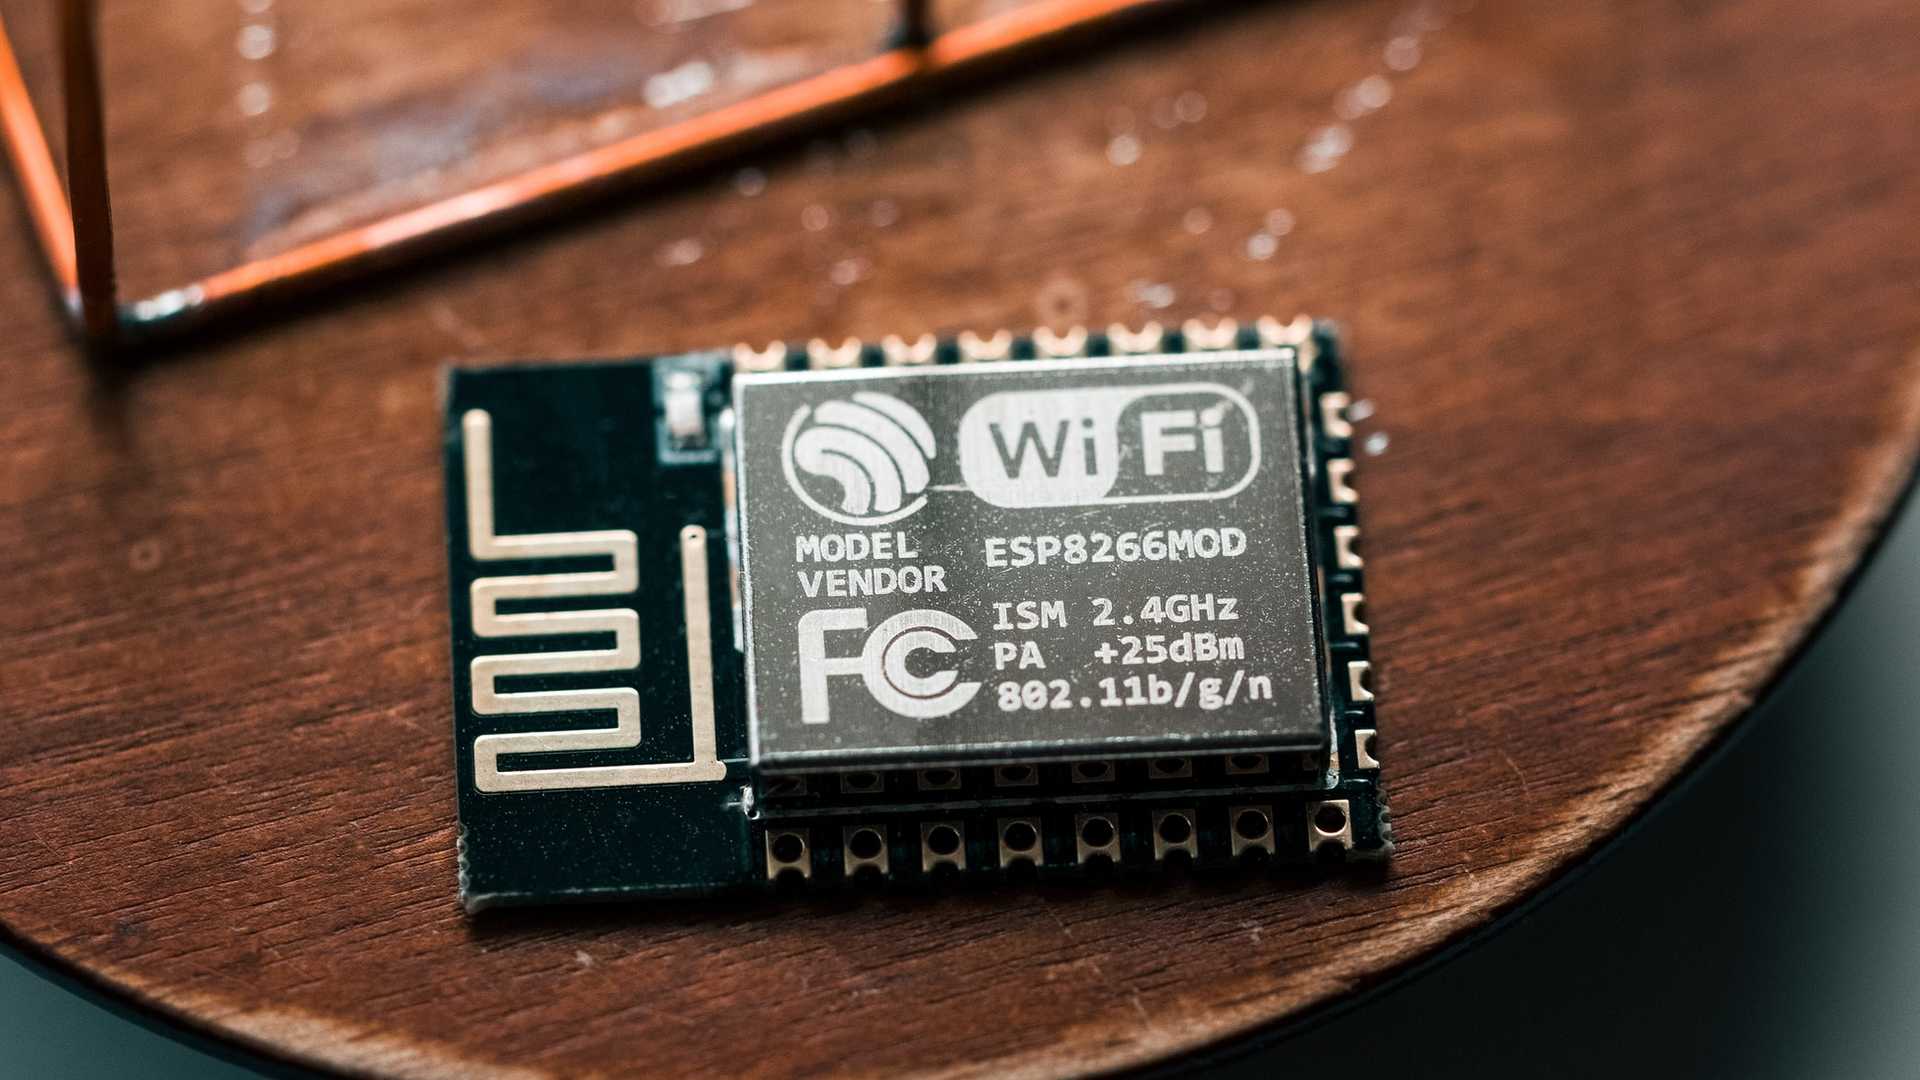 Closeup of a low-cost Wifi chip on a wooden table.